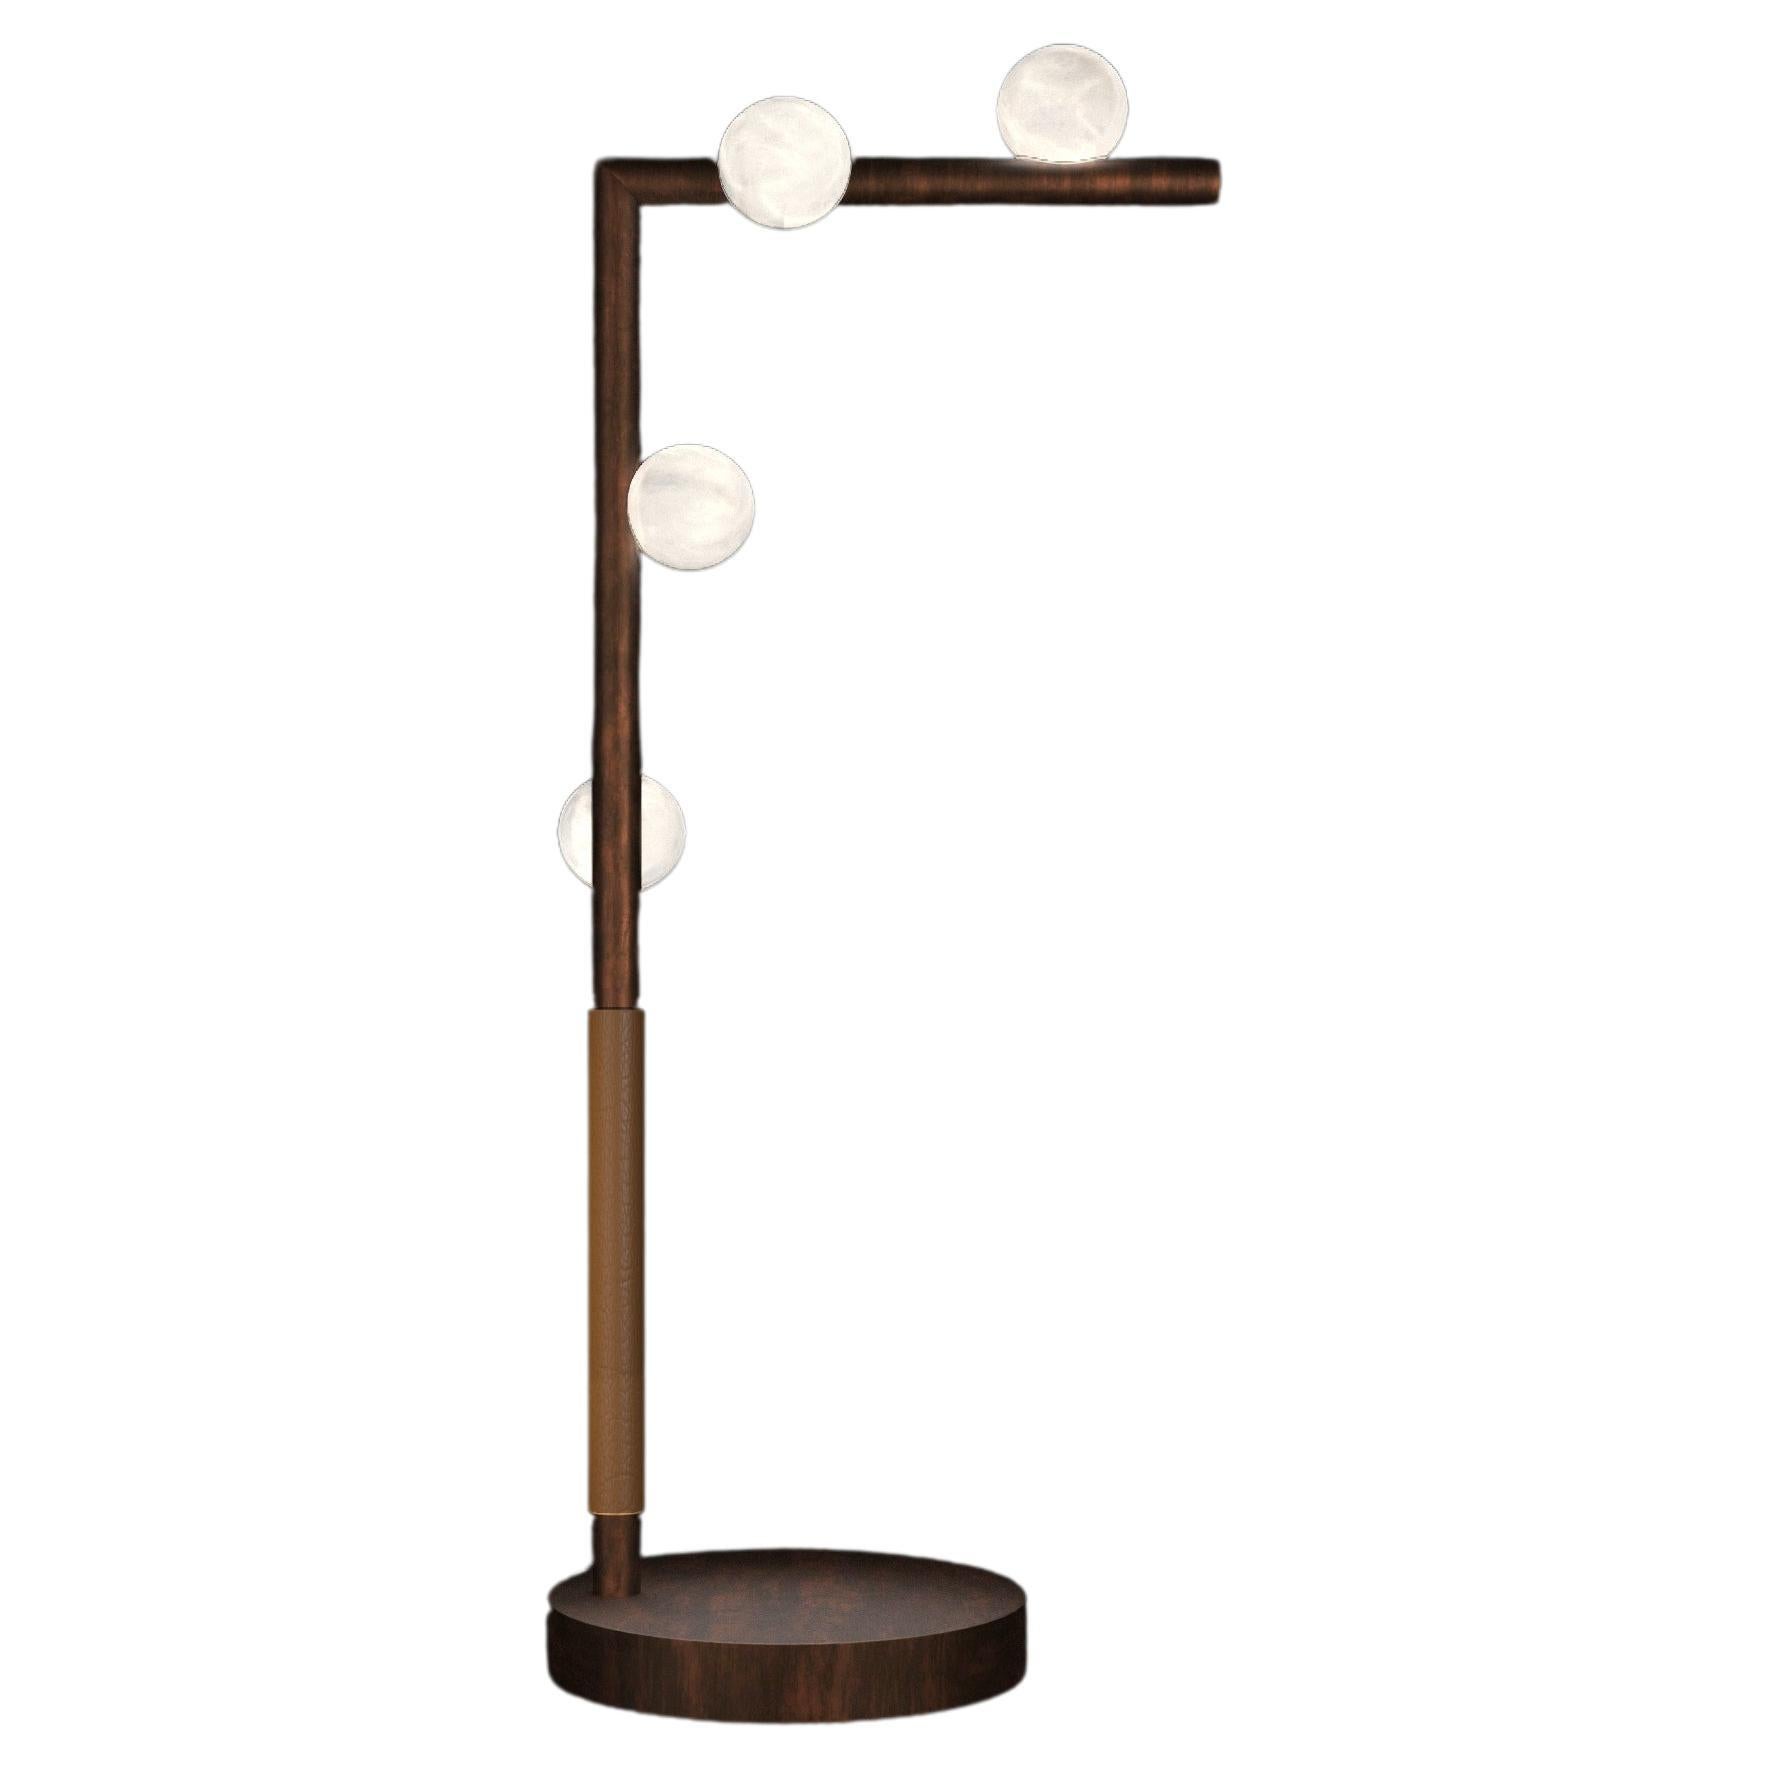 Demetra Ruggine Of Florence Metal Table Lamp by Alabastro Italiano For Sale